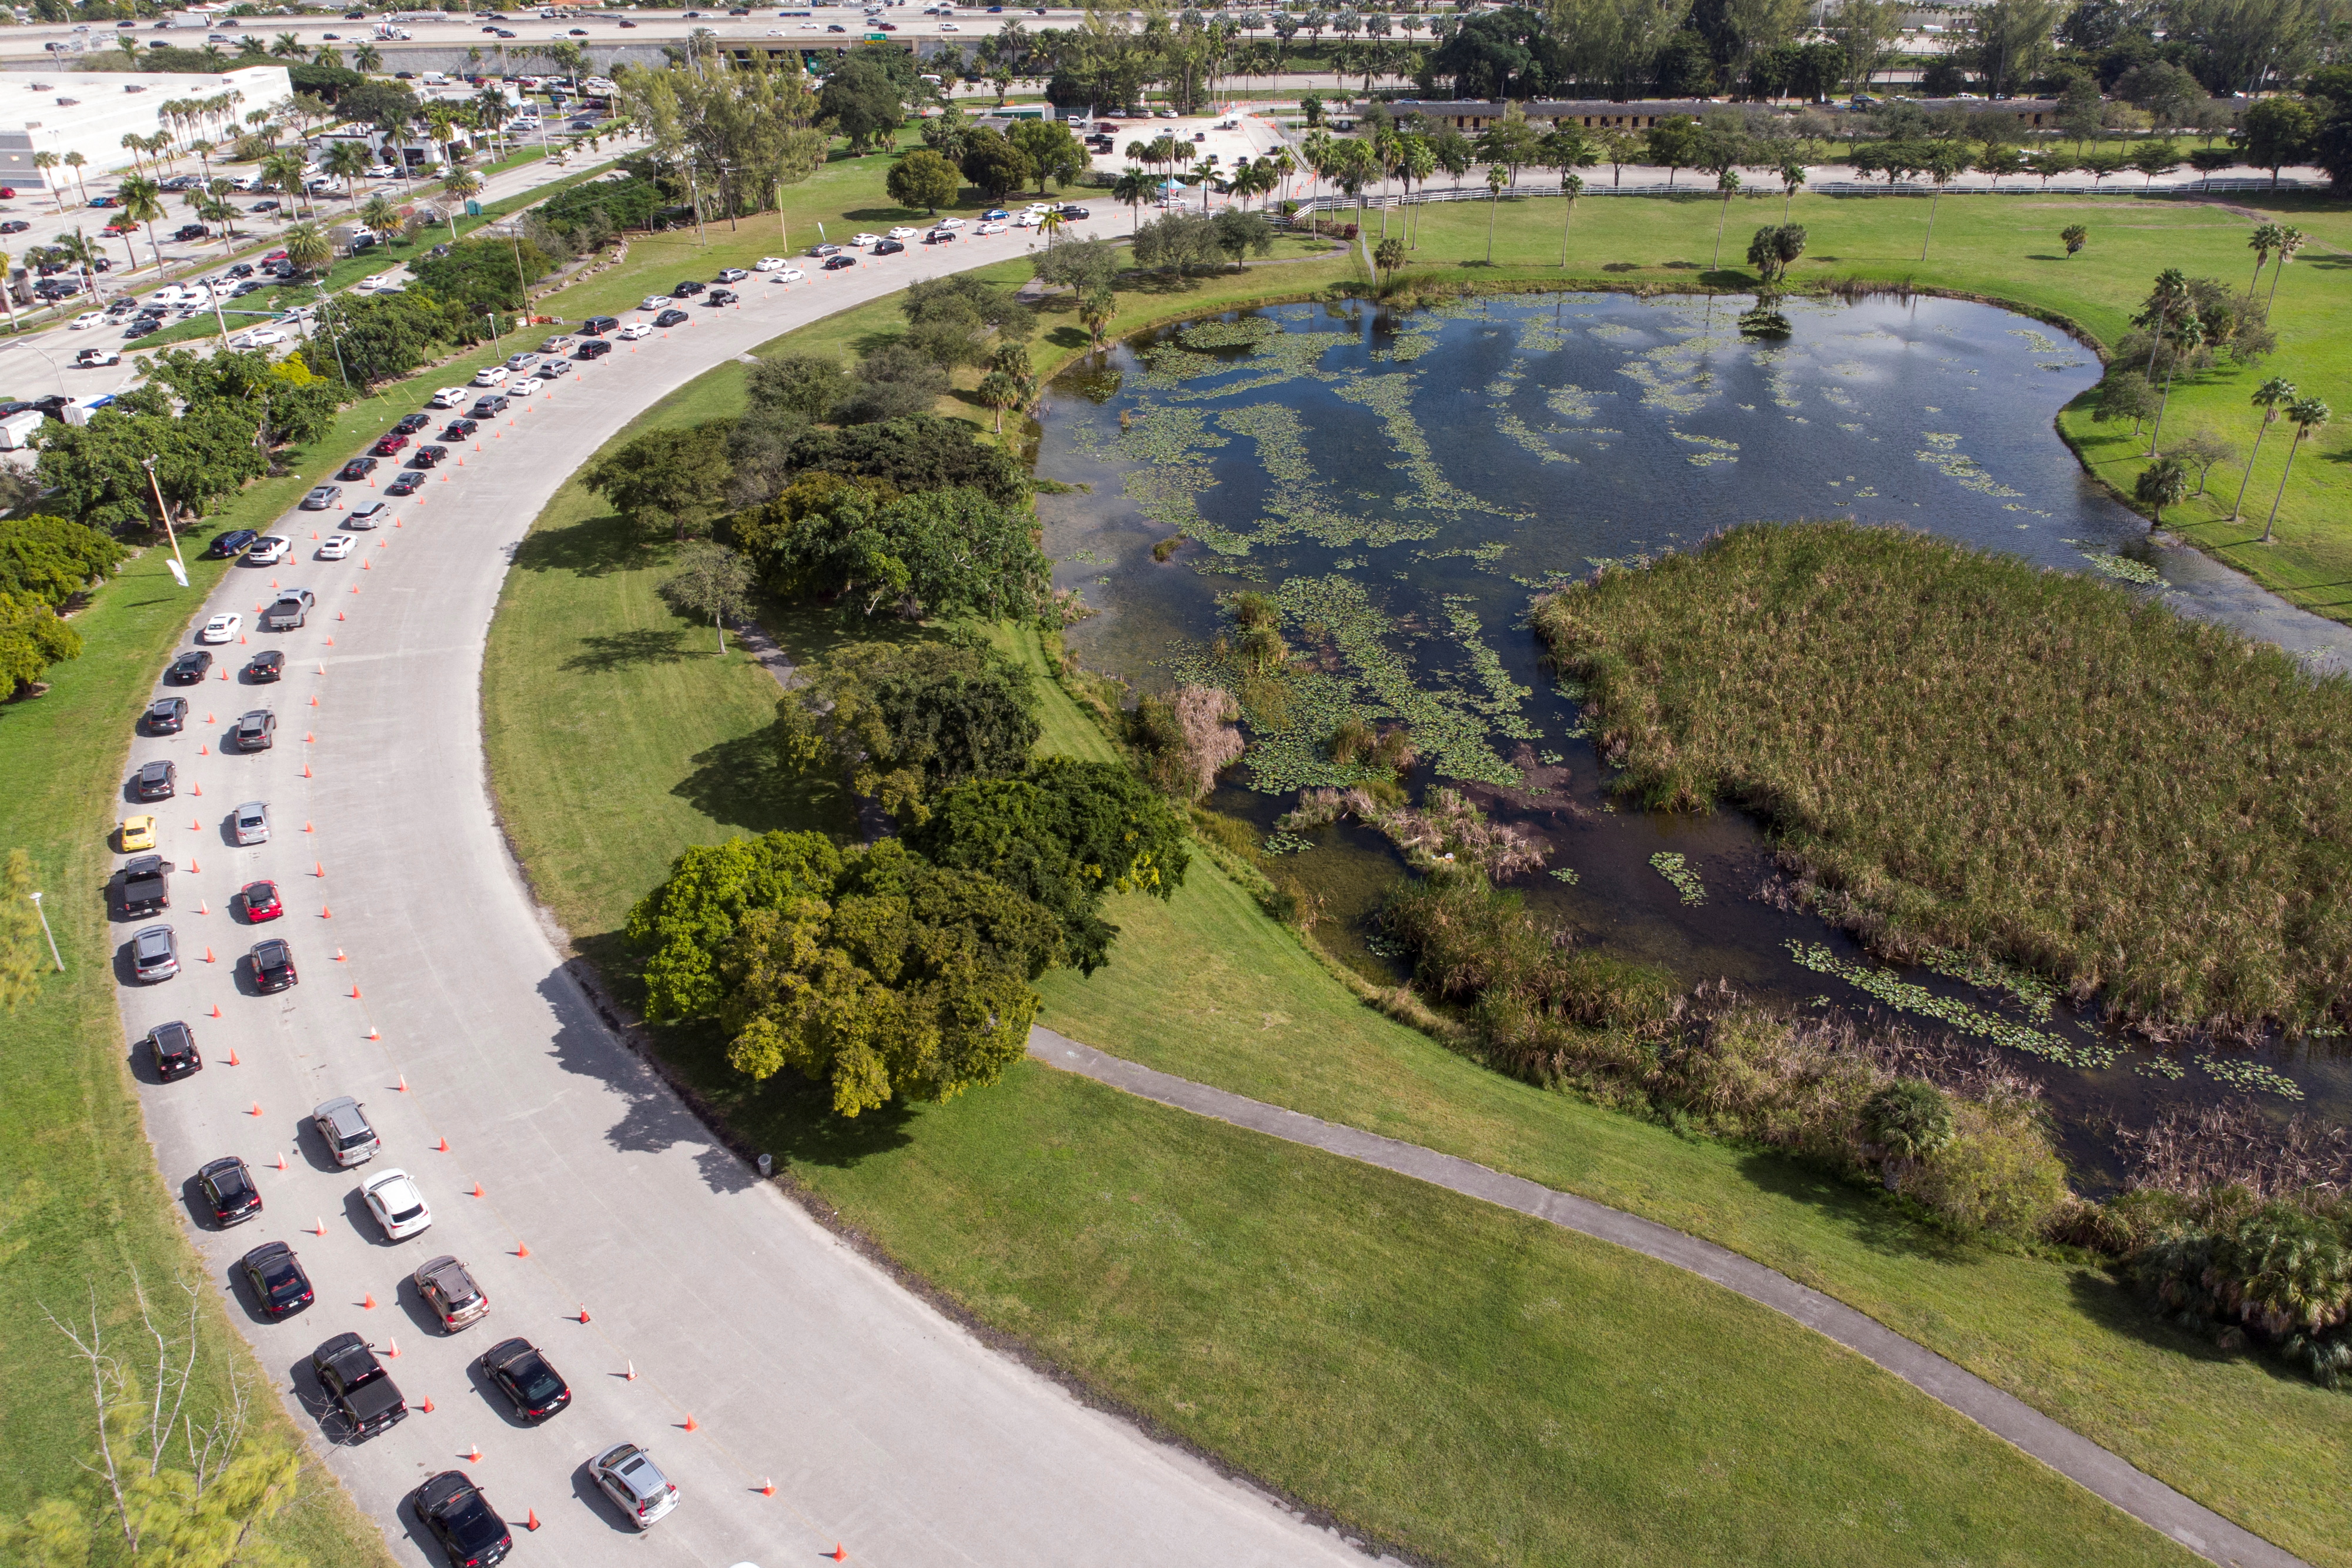 Cars wait in line at a COVID-19 drive-through testing site at Tropical Park, in Miami, Florida, U.S. December 17, 2021. Picture taken with a drone. REUTERS/Marco Bello